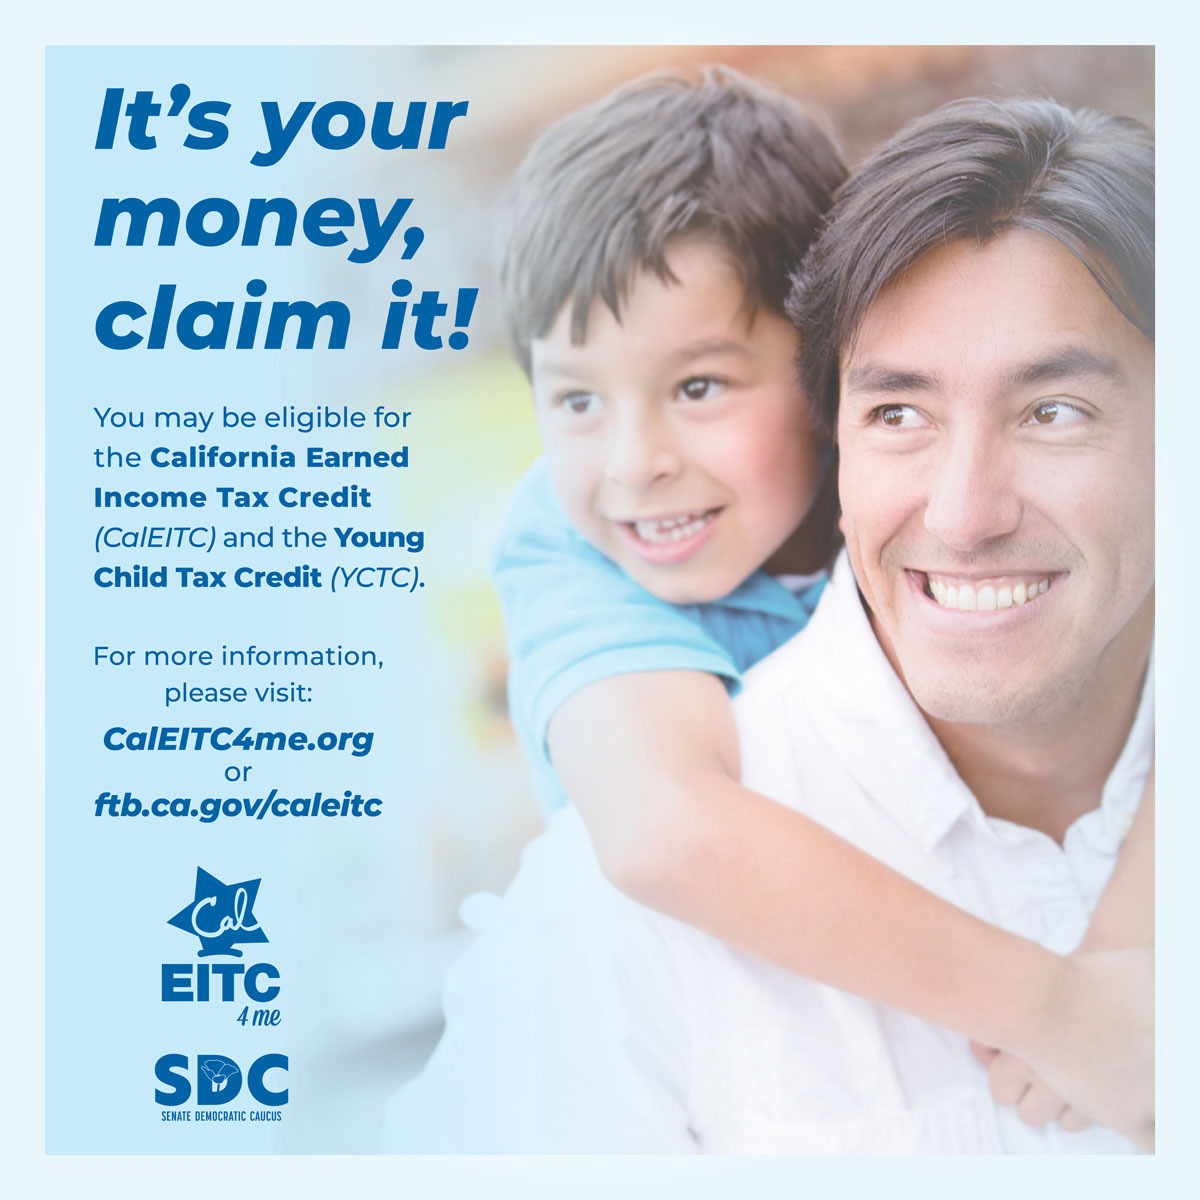 TODAY IS TAX DAY and it’s not too late to get $$ back! Those who qualify for the #CalEITC & the Young Child Tax Credit may qualify for free tax preparation assistance. Learn more: caleitc4me.org/fileyourtaxes/ #CALeg #Taxes @CalEITC4Me @CalFTB